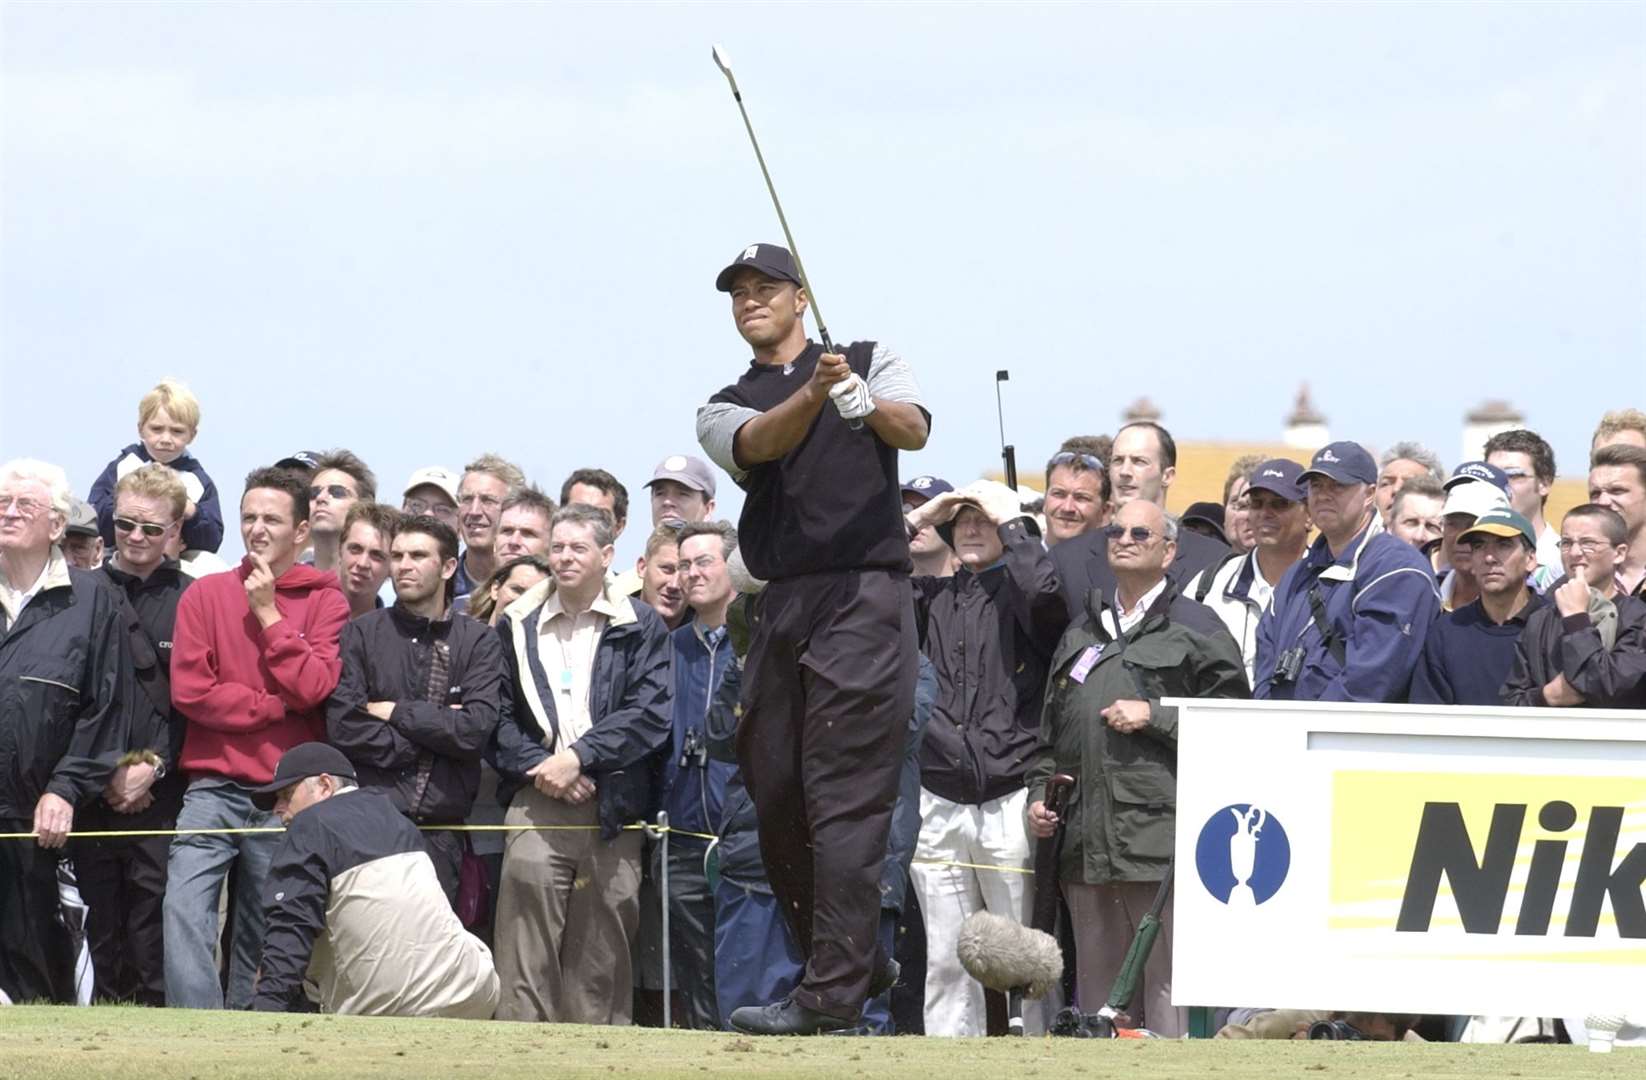 Tiger Woods tees off during the 2003 Open at Sandwich - fingers crossed he will be back in 2021 when the delayed tournament is due to take place